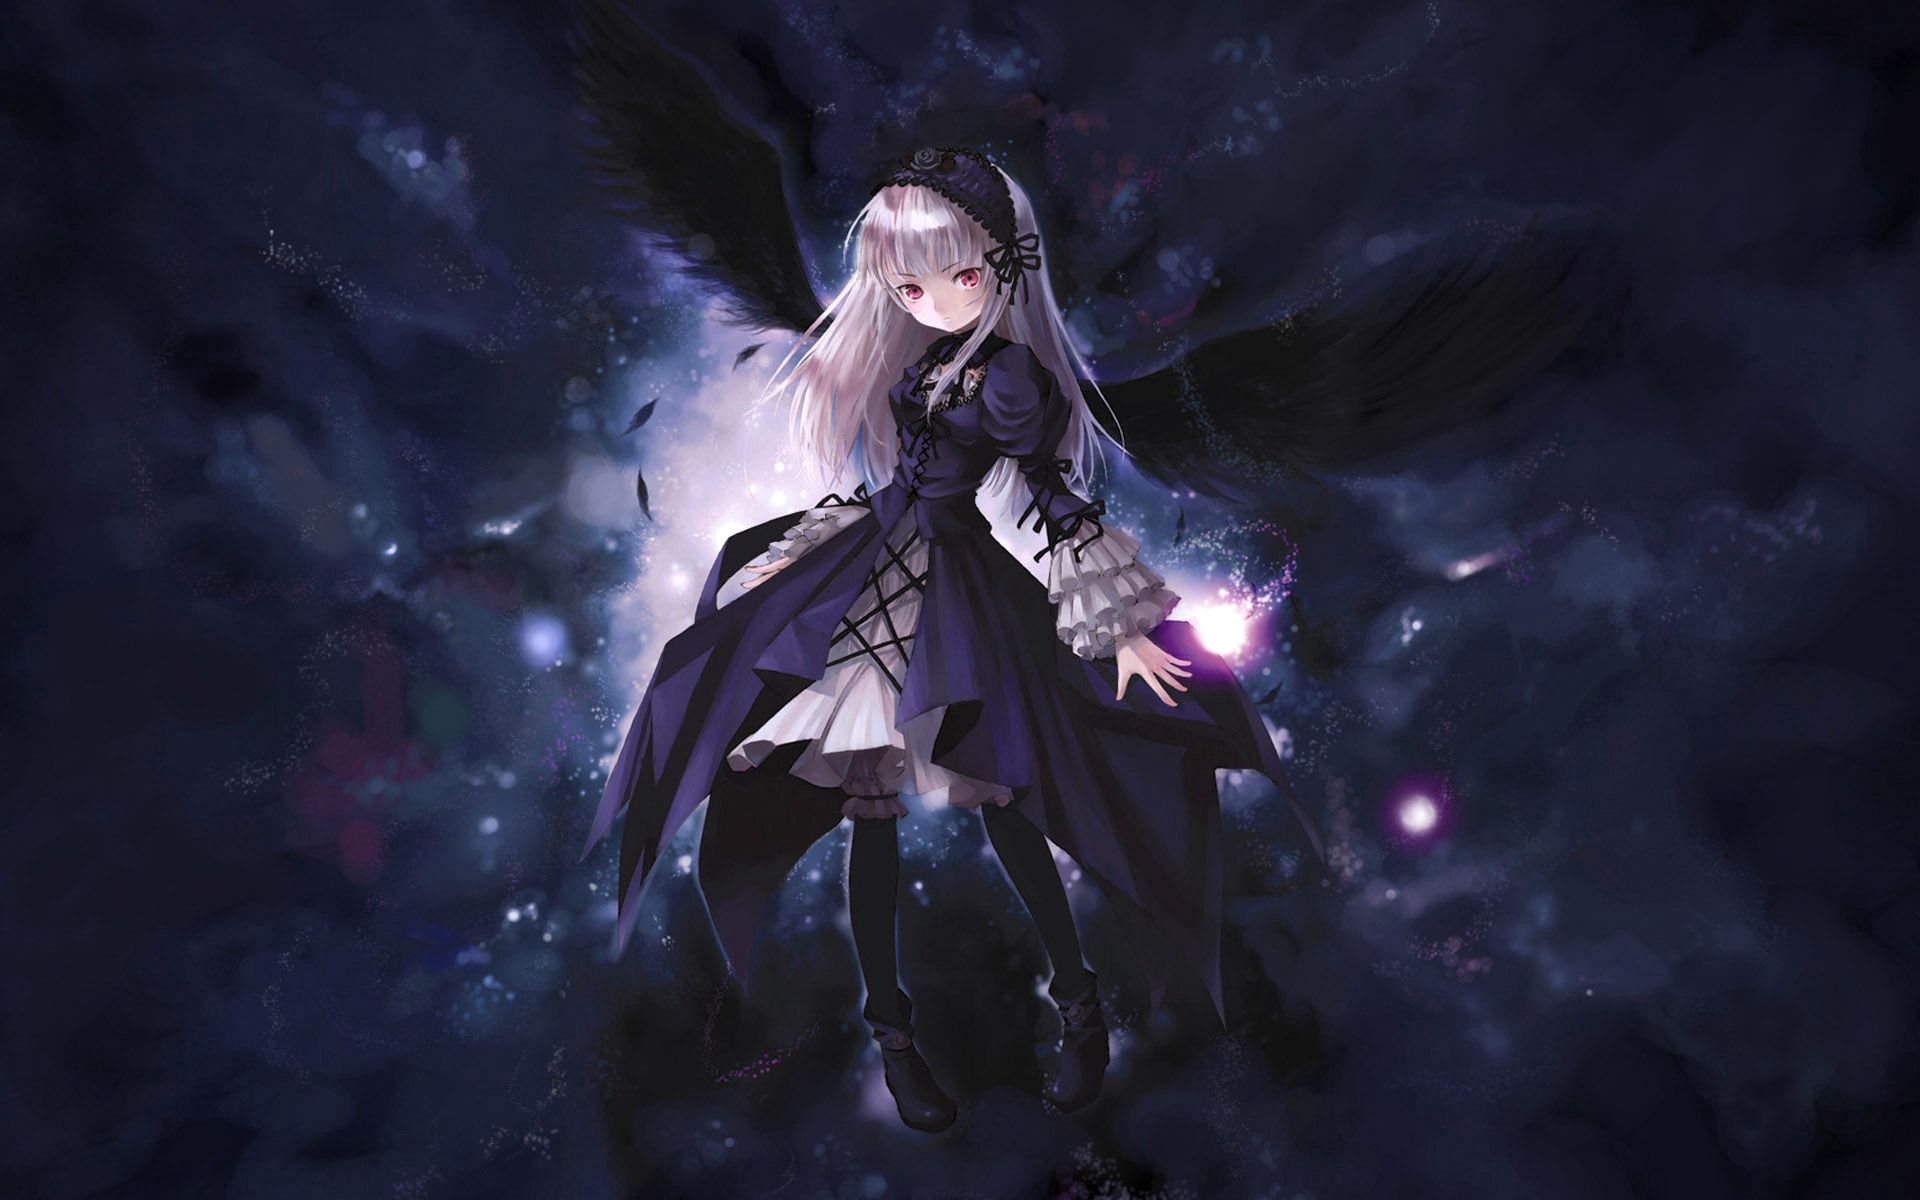 111348 download wallpaper anime, flight, girl, wings screensavers and pictures for free